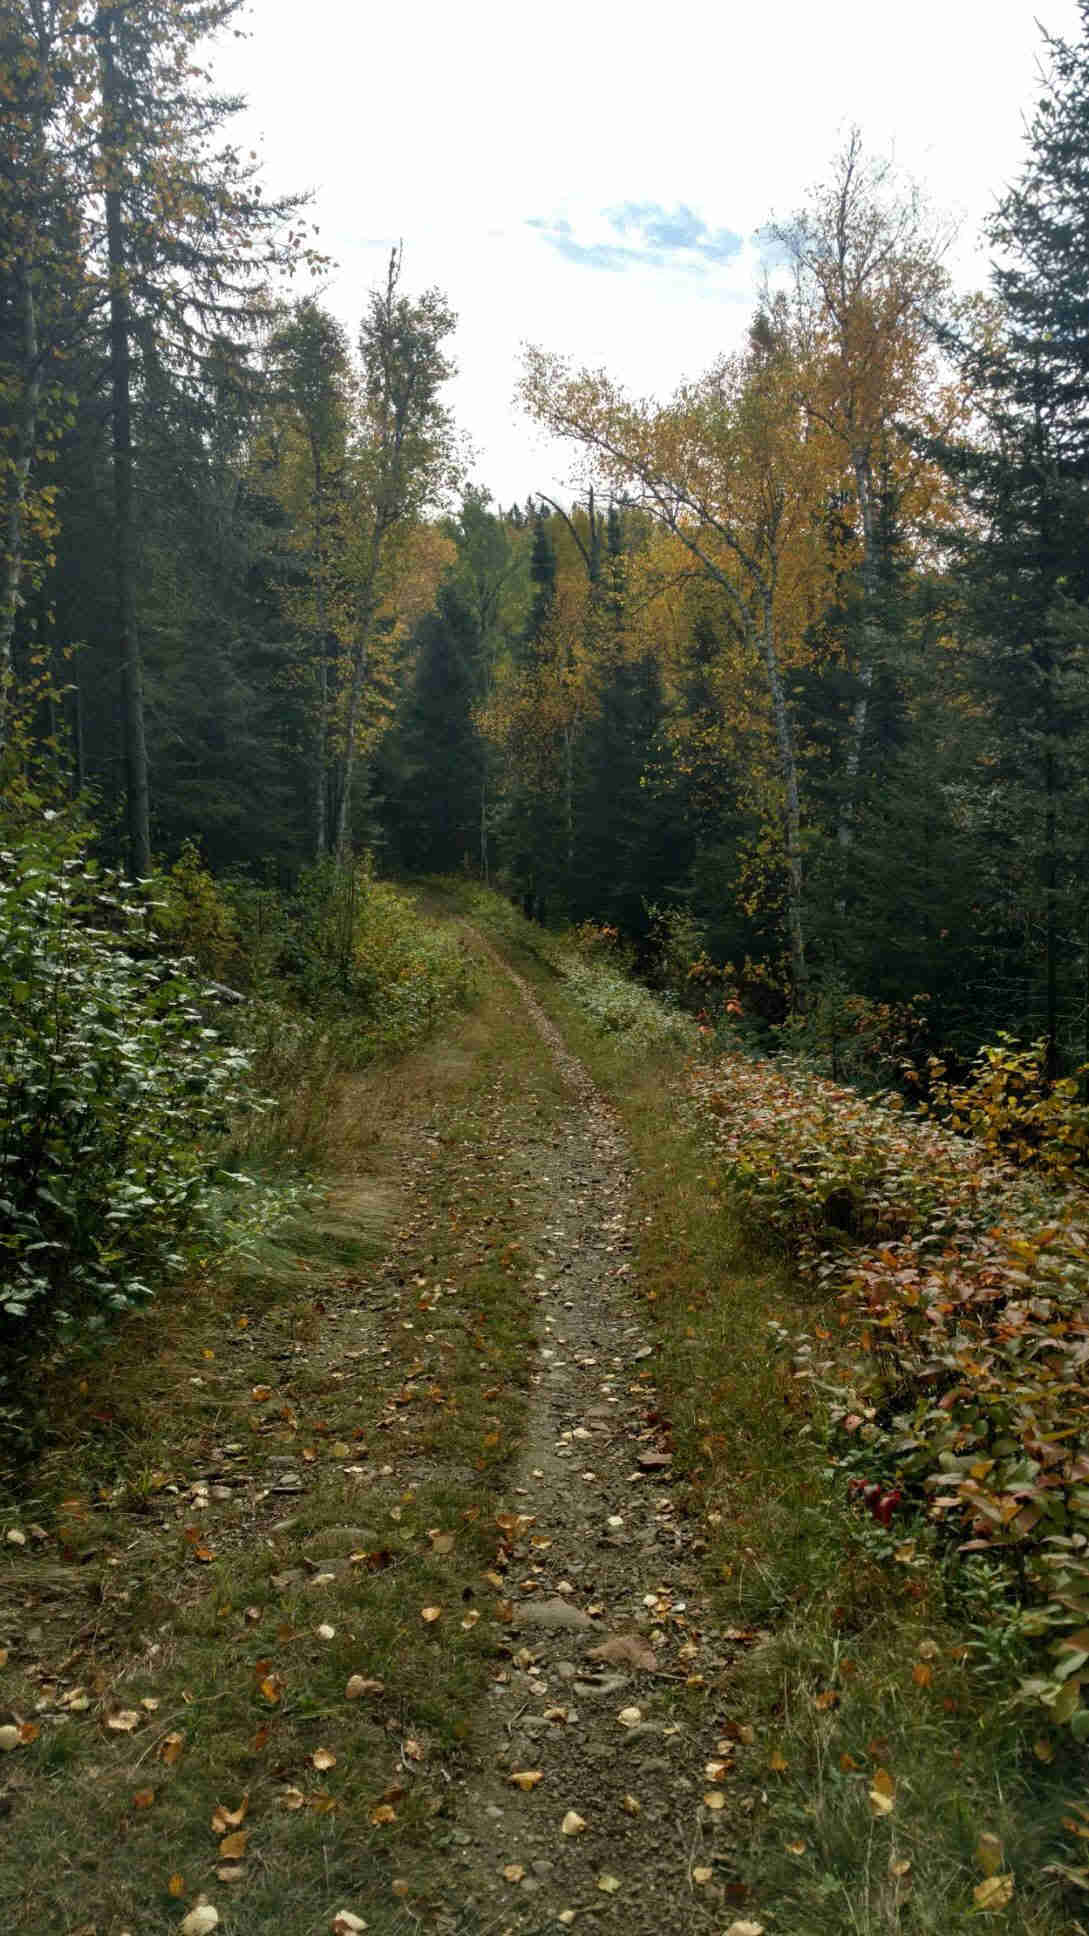 View of narrow grass trail leading into the trees